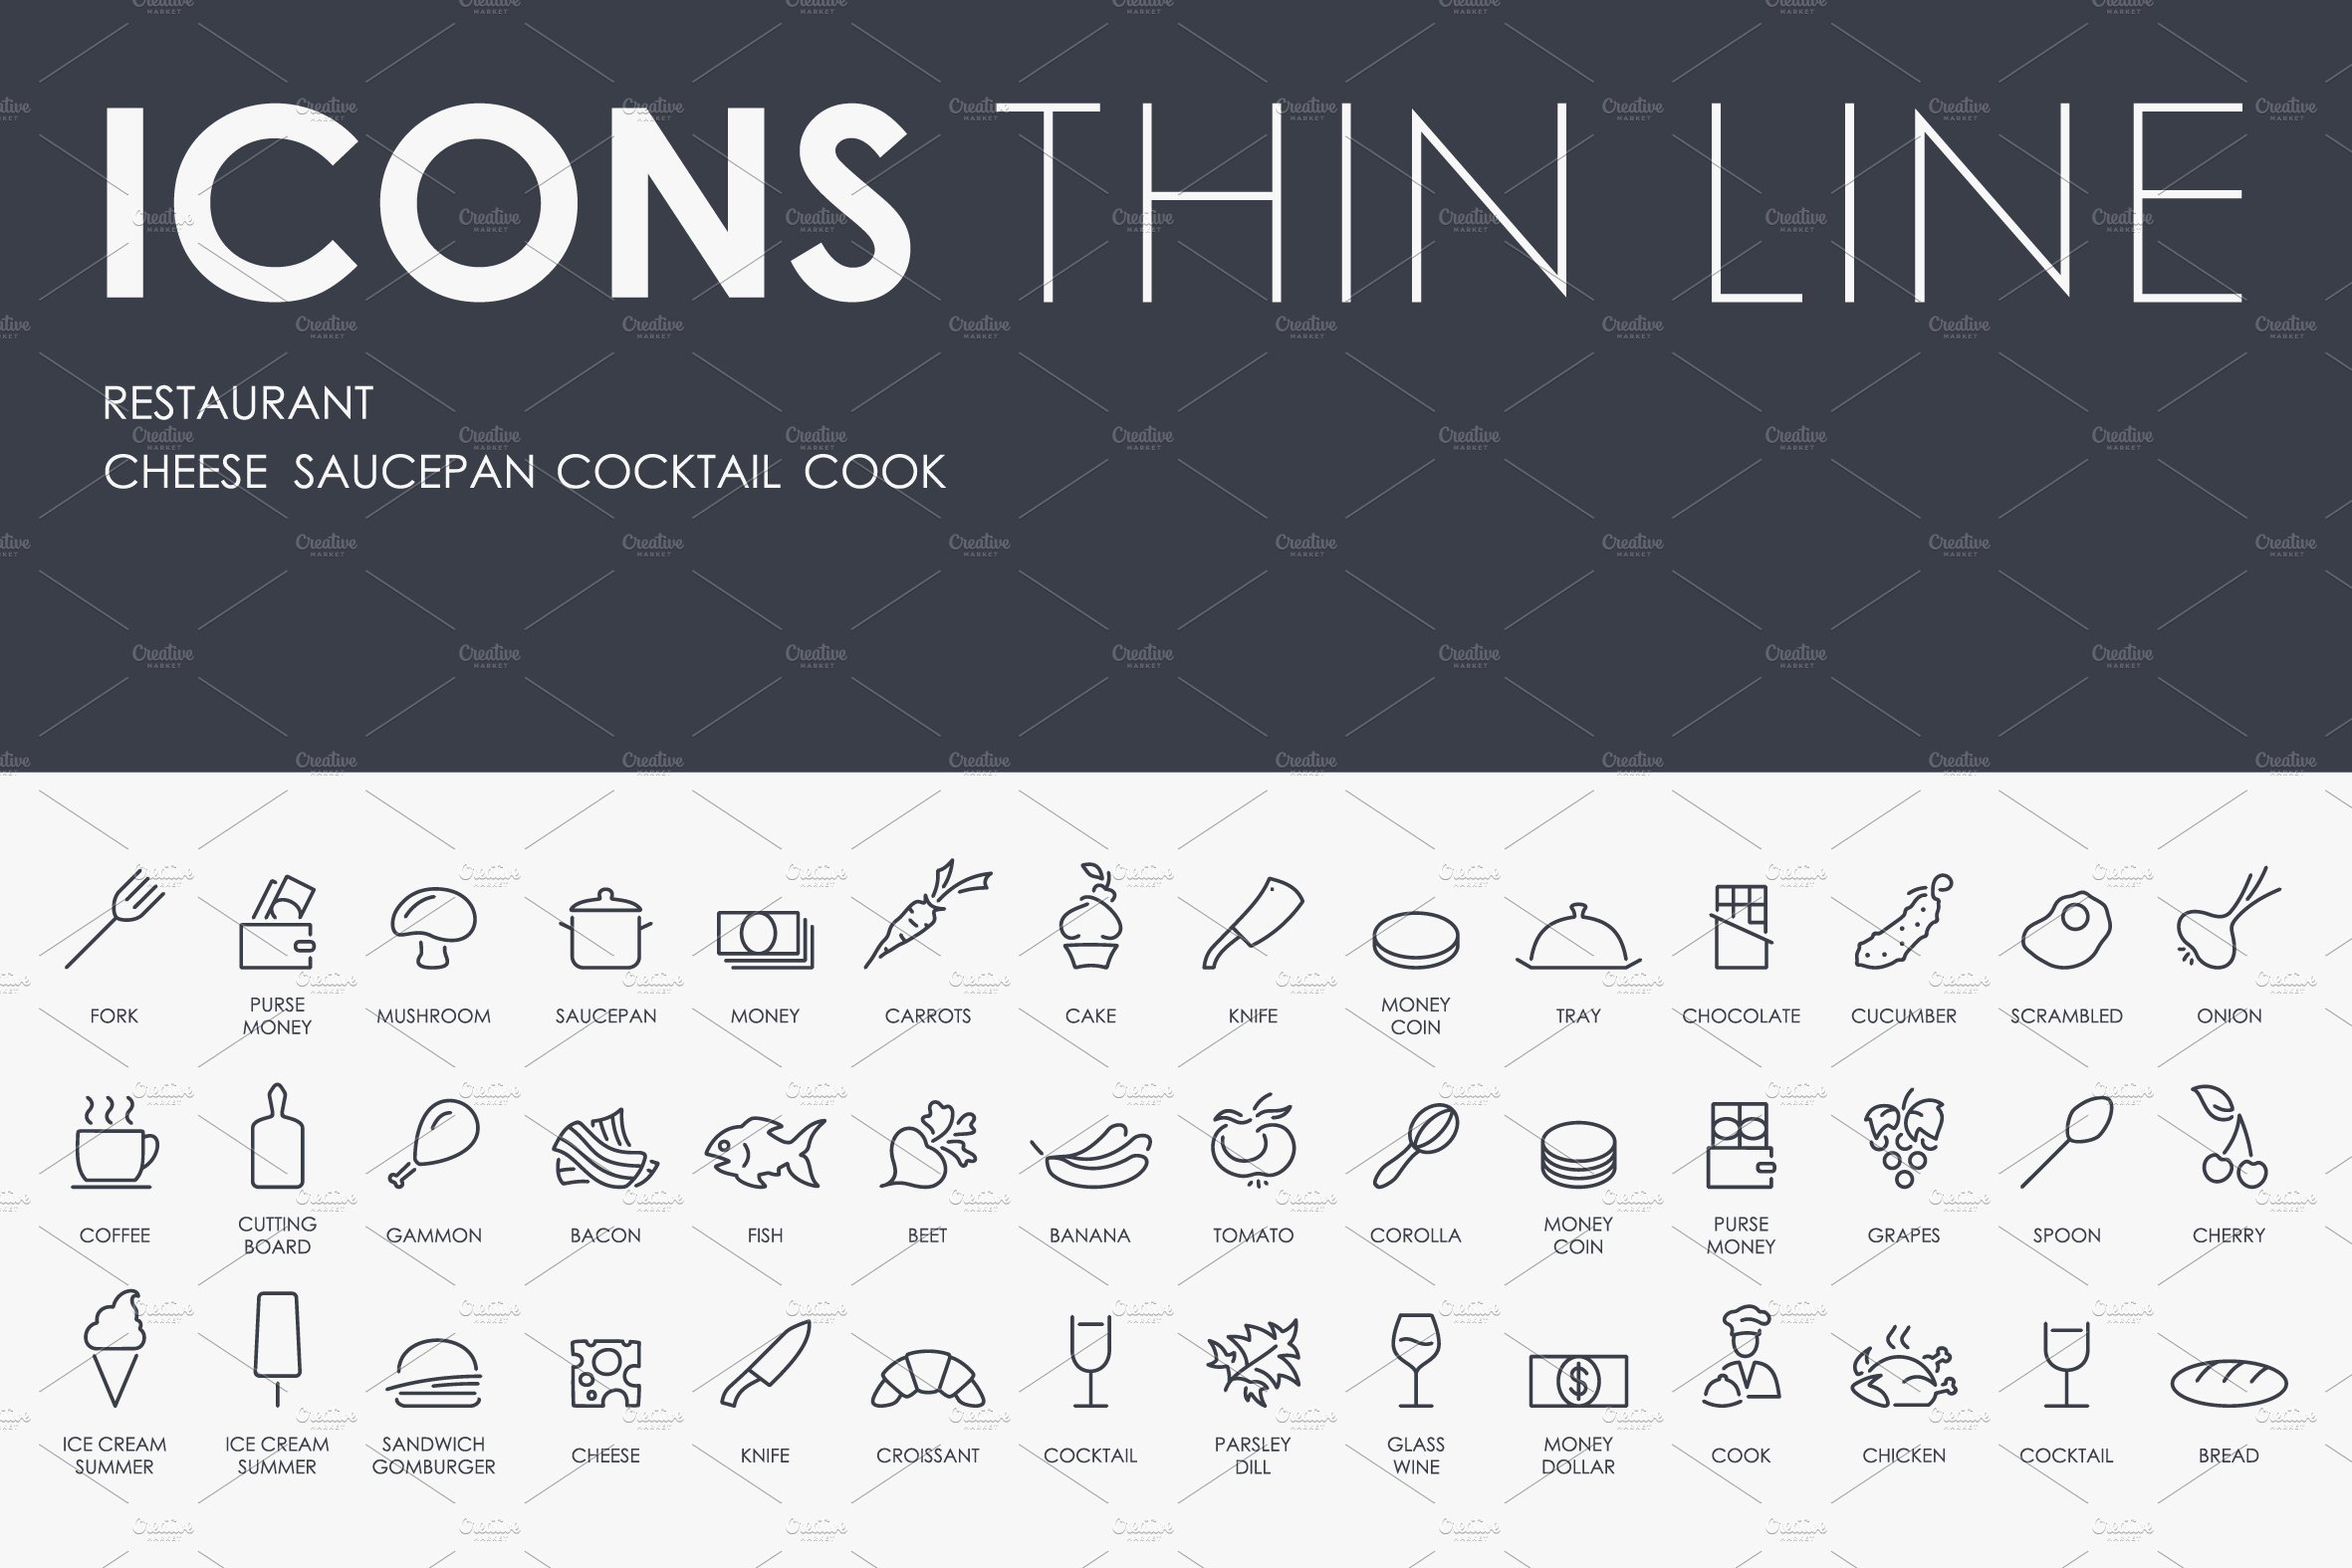 Restaurant thinline icons cover image.